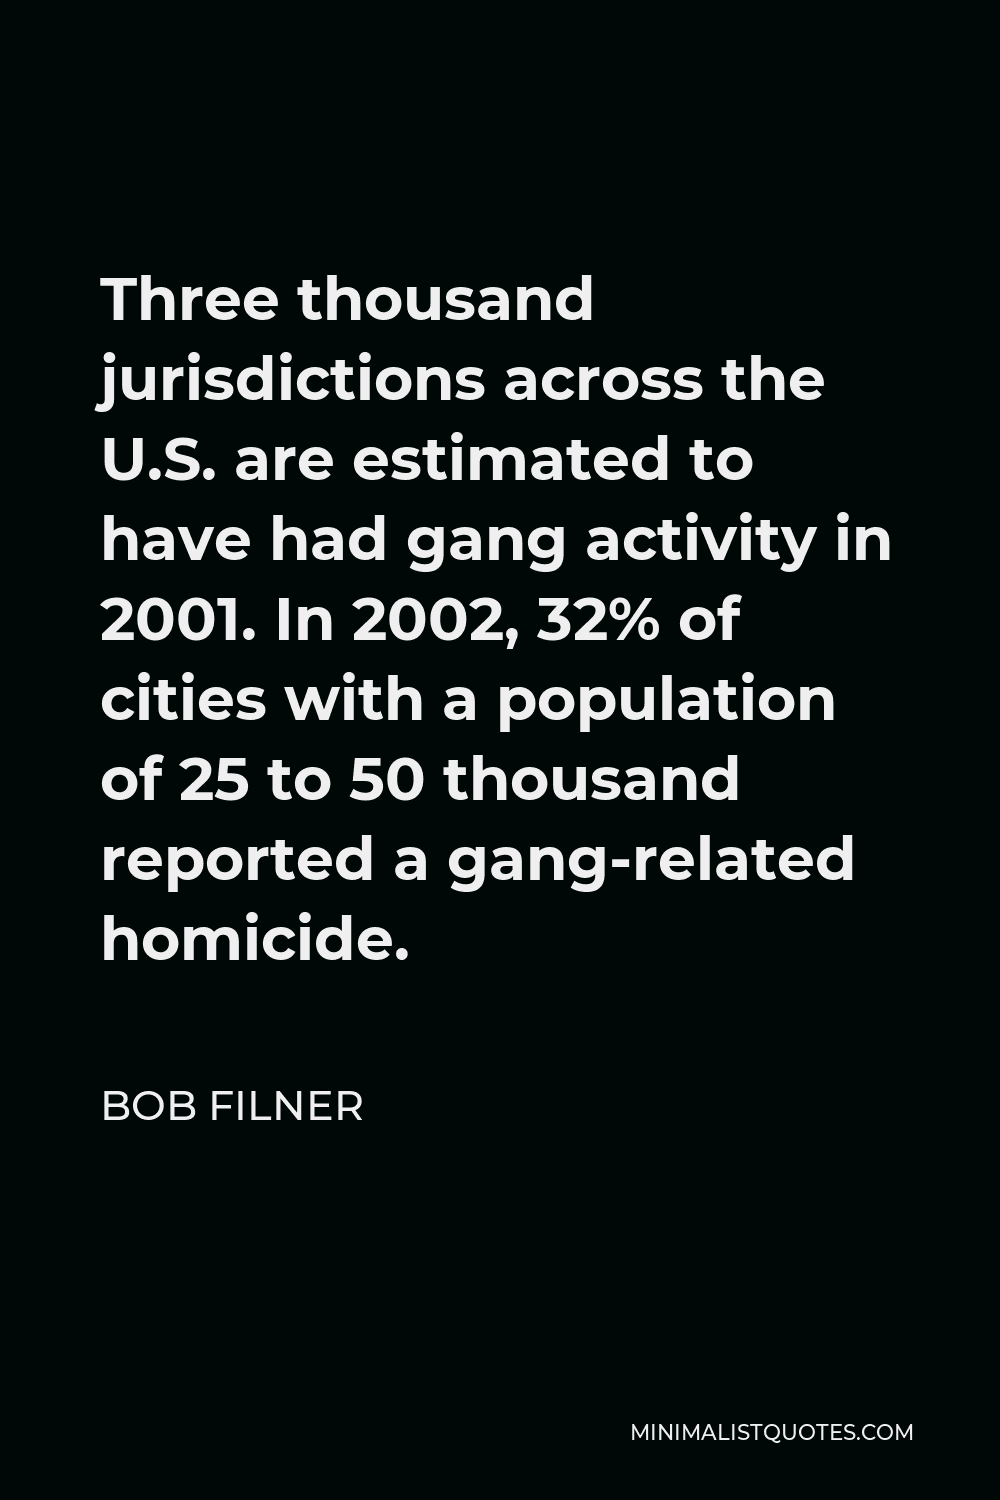 Bob Filner Quote - Three thousand jurisdictions across the U.S. are estimated to have had gang activity in 2001. In 2002, 32% of cities with a population of 25 to 50 thousand reported a gang-related homicide.